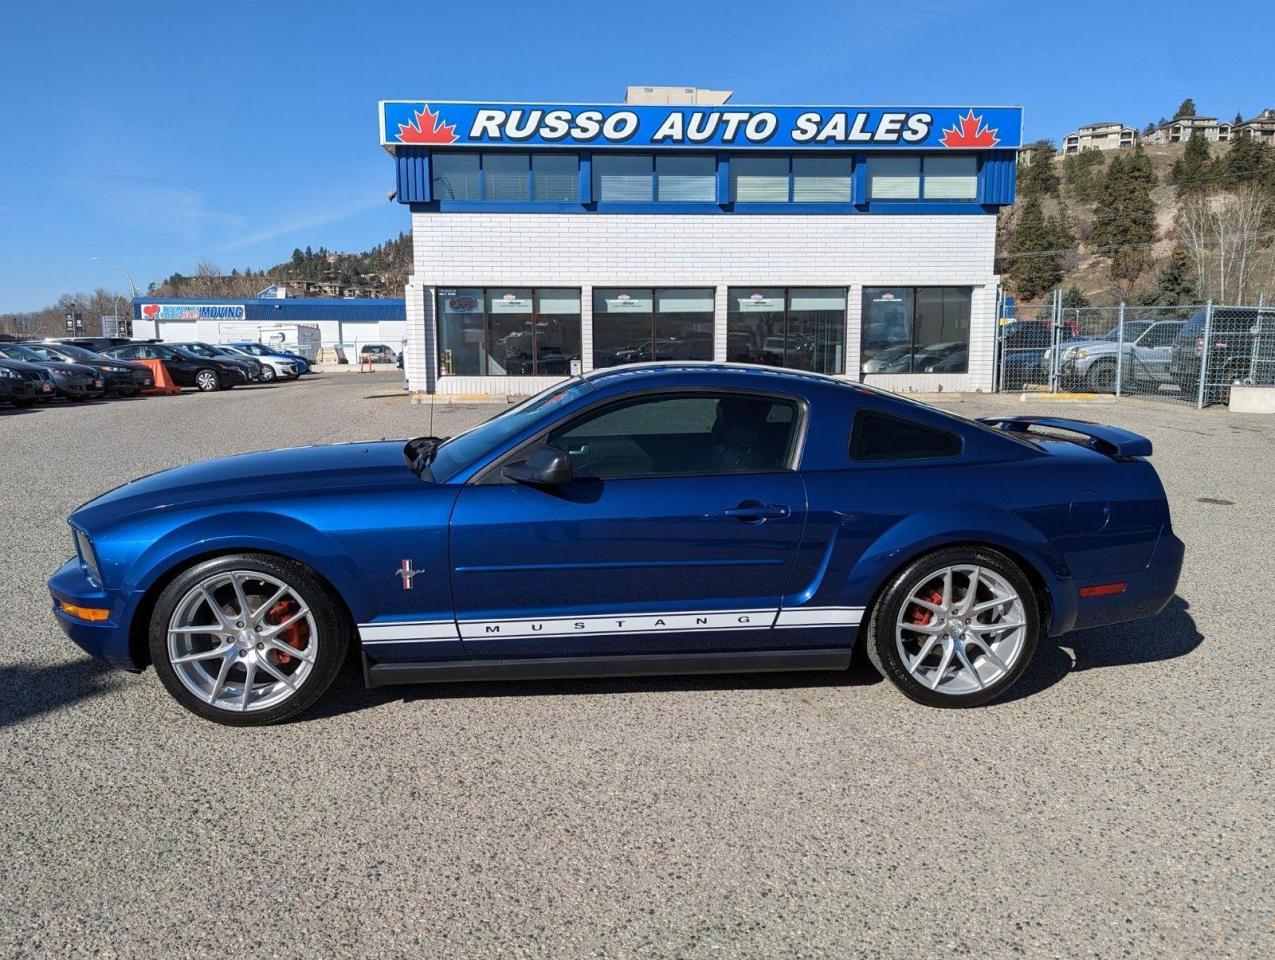 2006 Ford Mustang Low Km, 2 Dr Coupe, Leather, 5MT - Photo #8